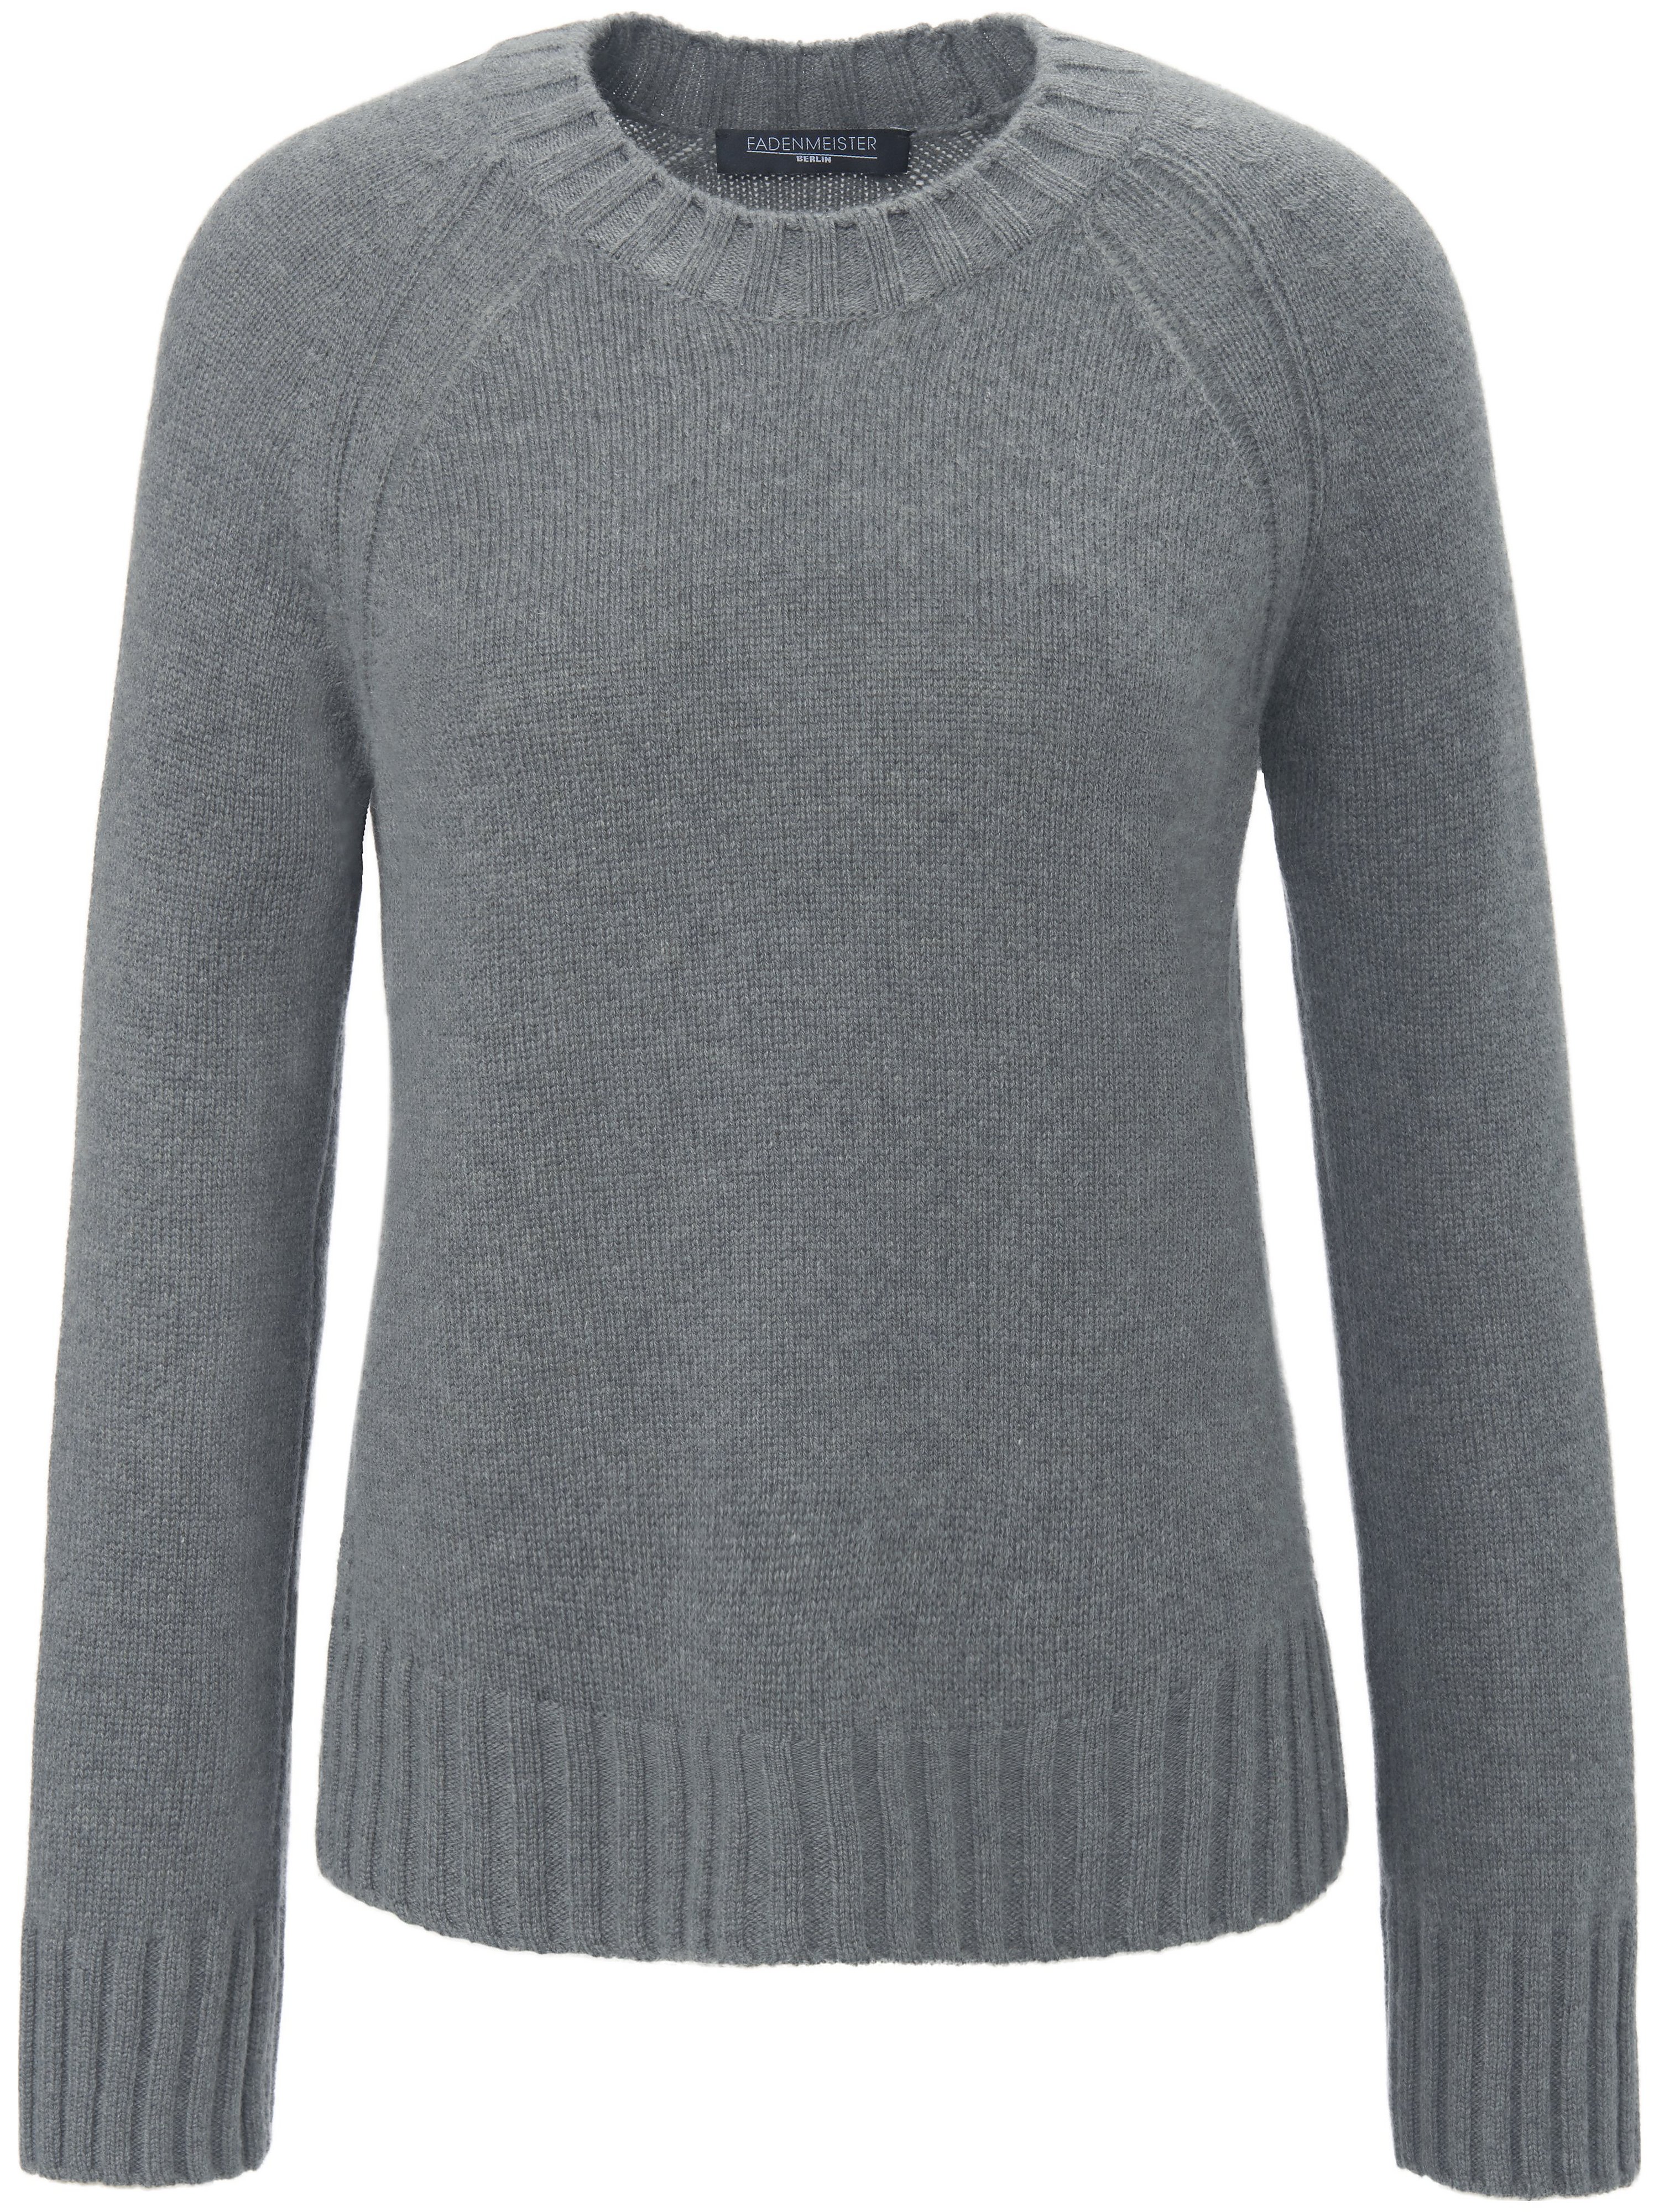 Le pull encolure ronde  Fadenmeister Berlin vert taille 44